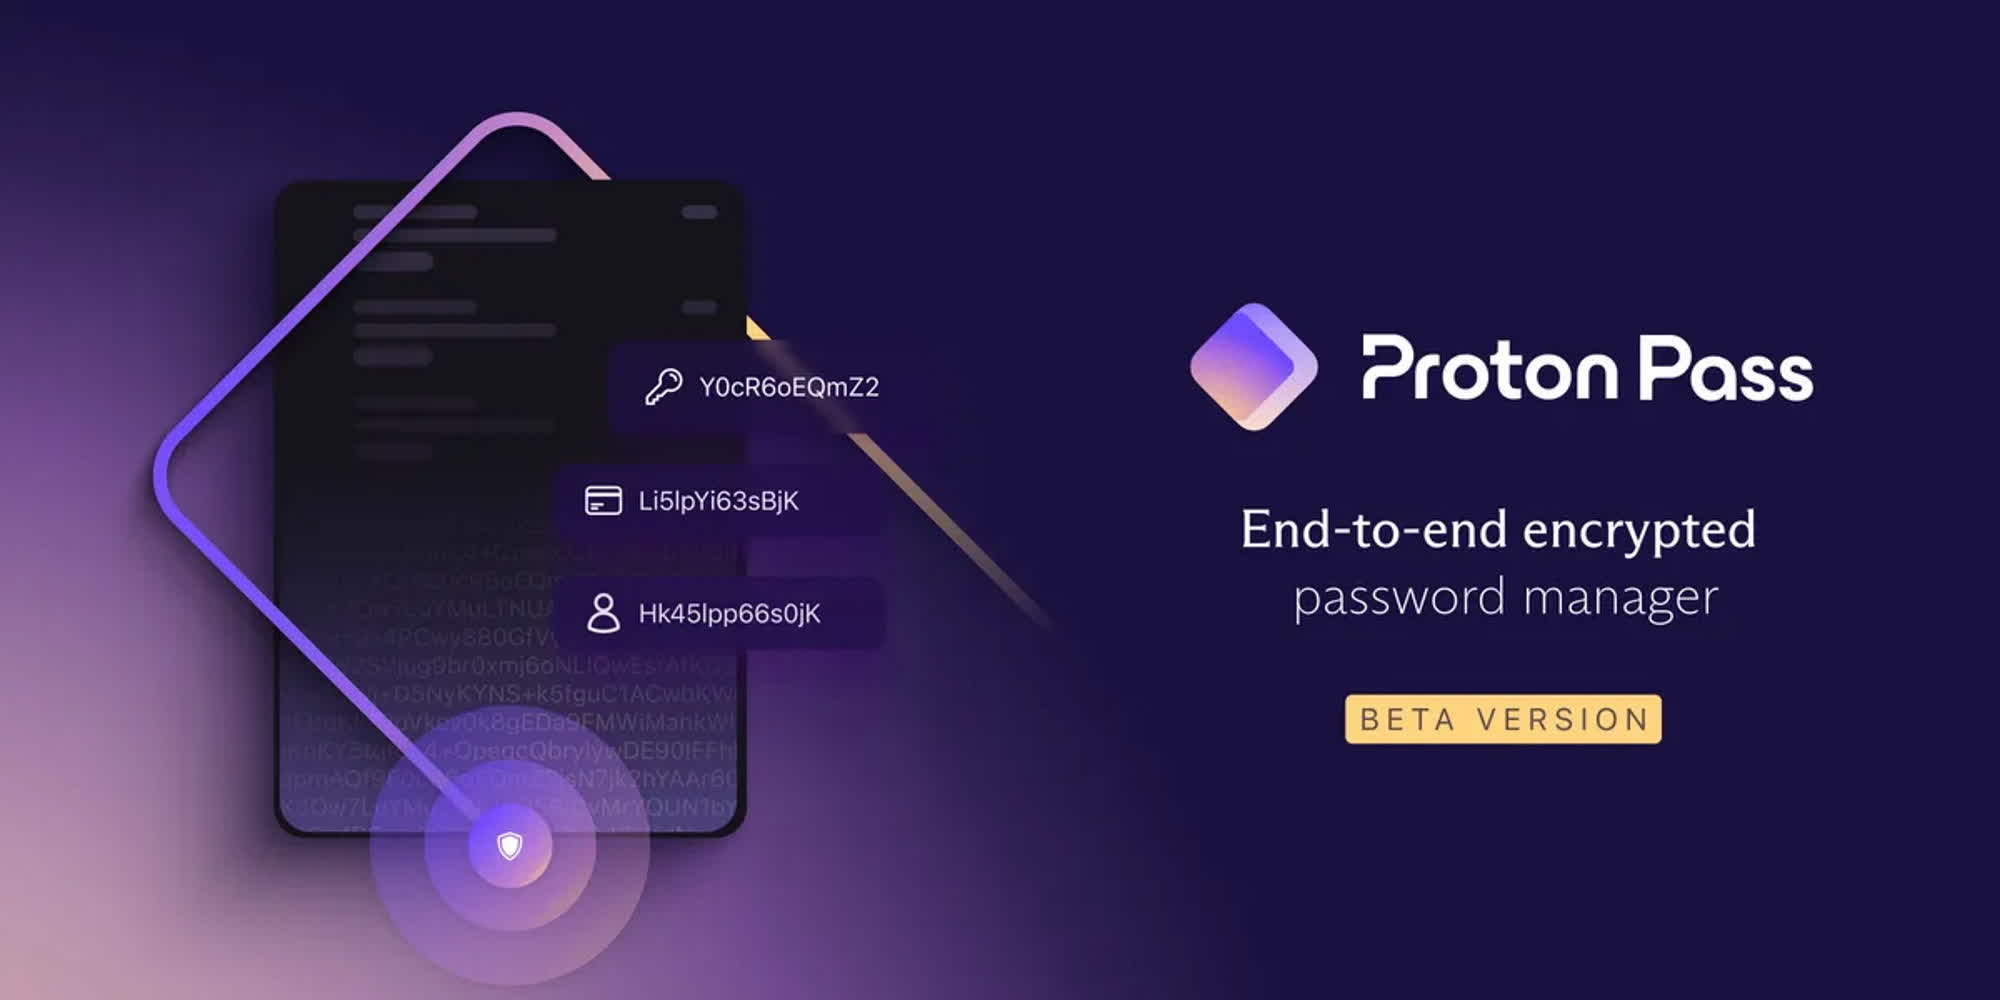 Proton Mail's new product is a secure password manager